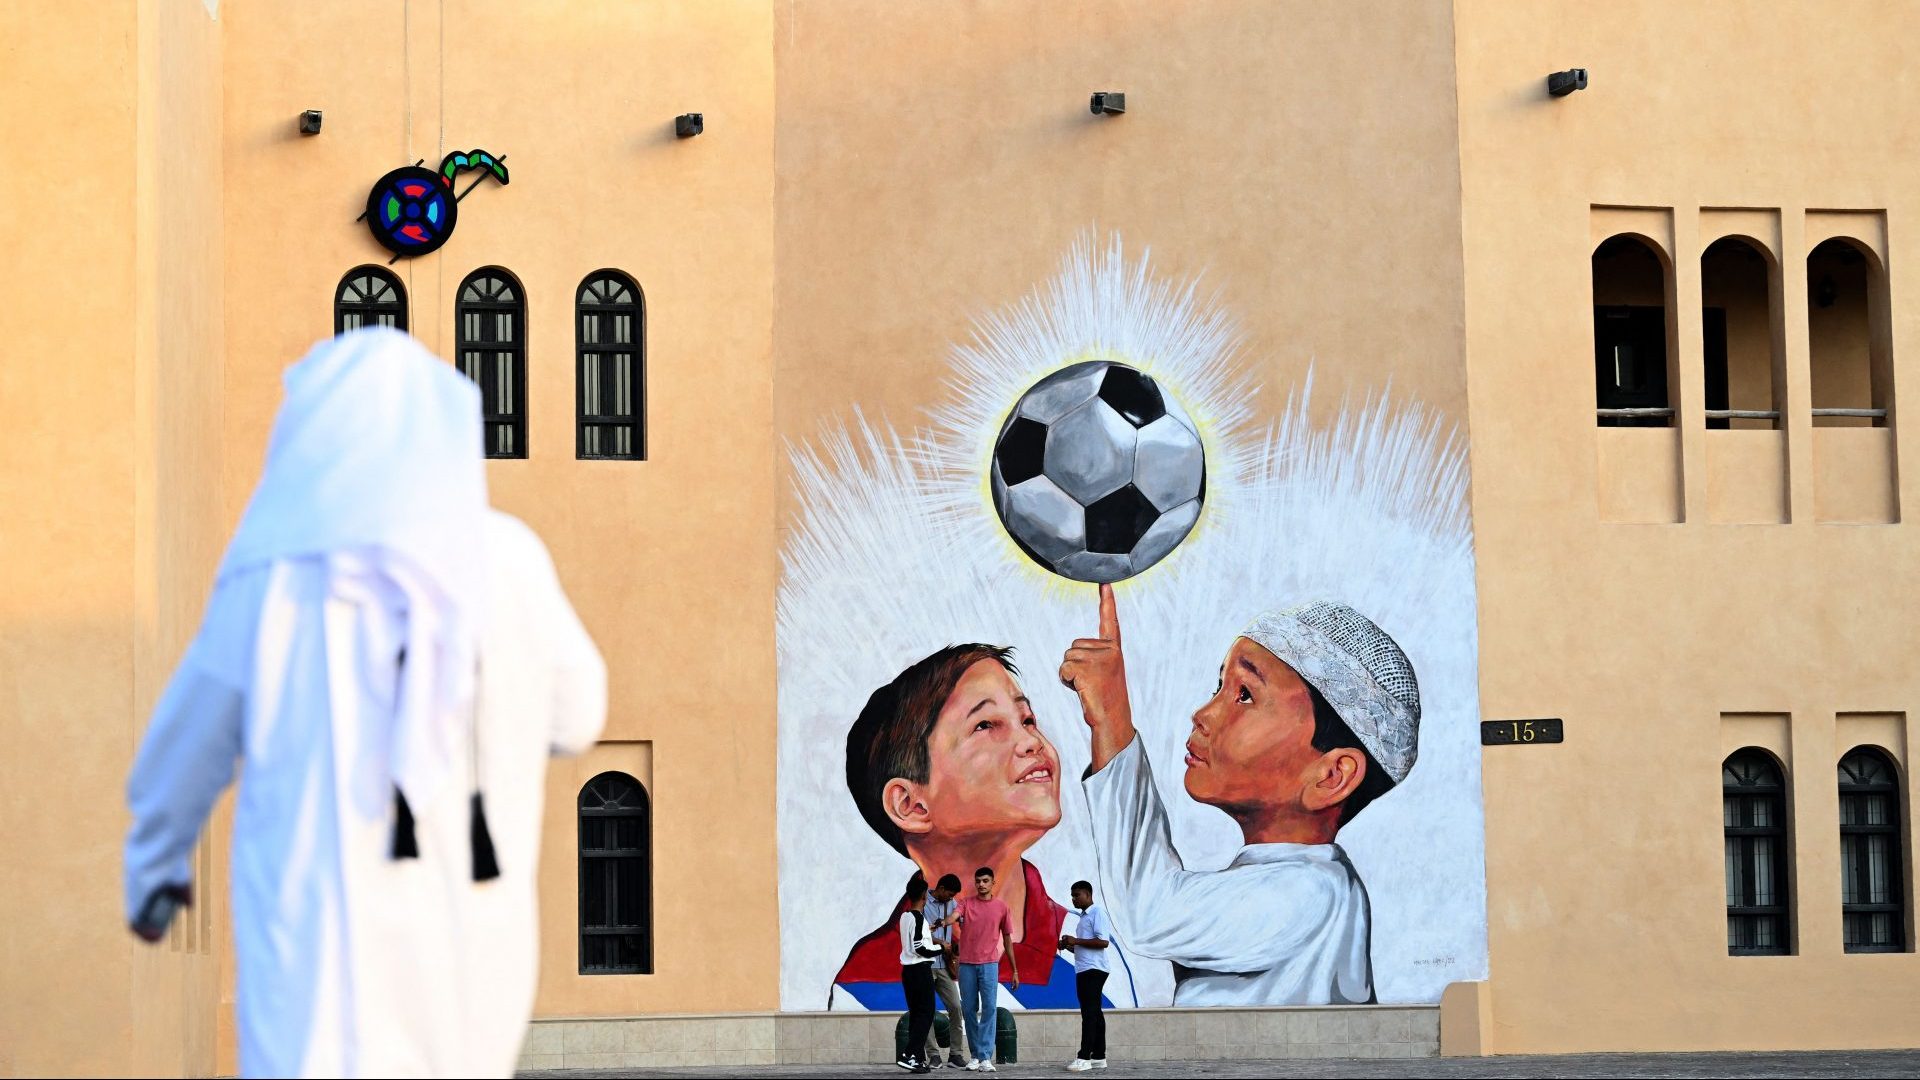 People walk past a mural in Doha on November 8, 2022, ahead of the Qatar 2022 FIFA World Cup football tournament. Photo: GABRIEL BOUYS/AFP via Getty Images